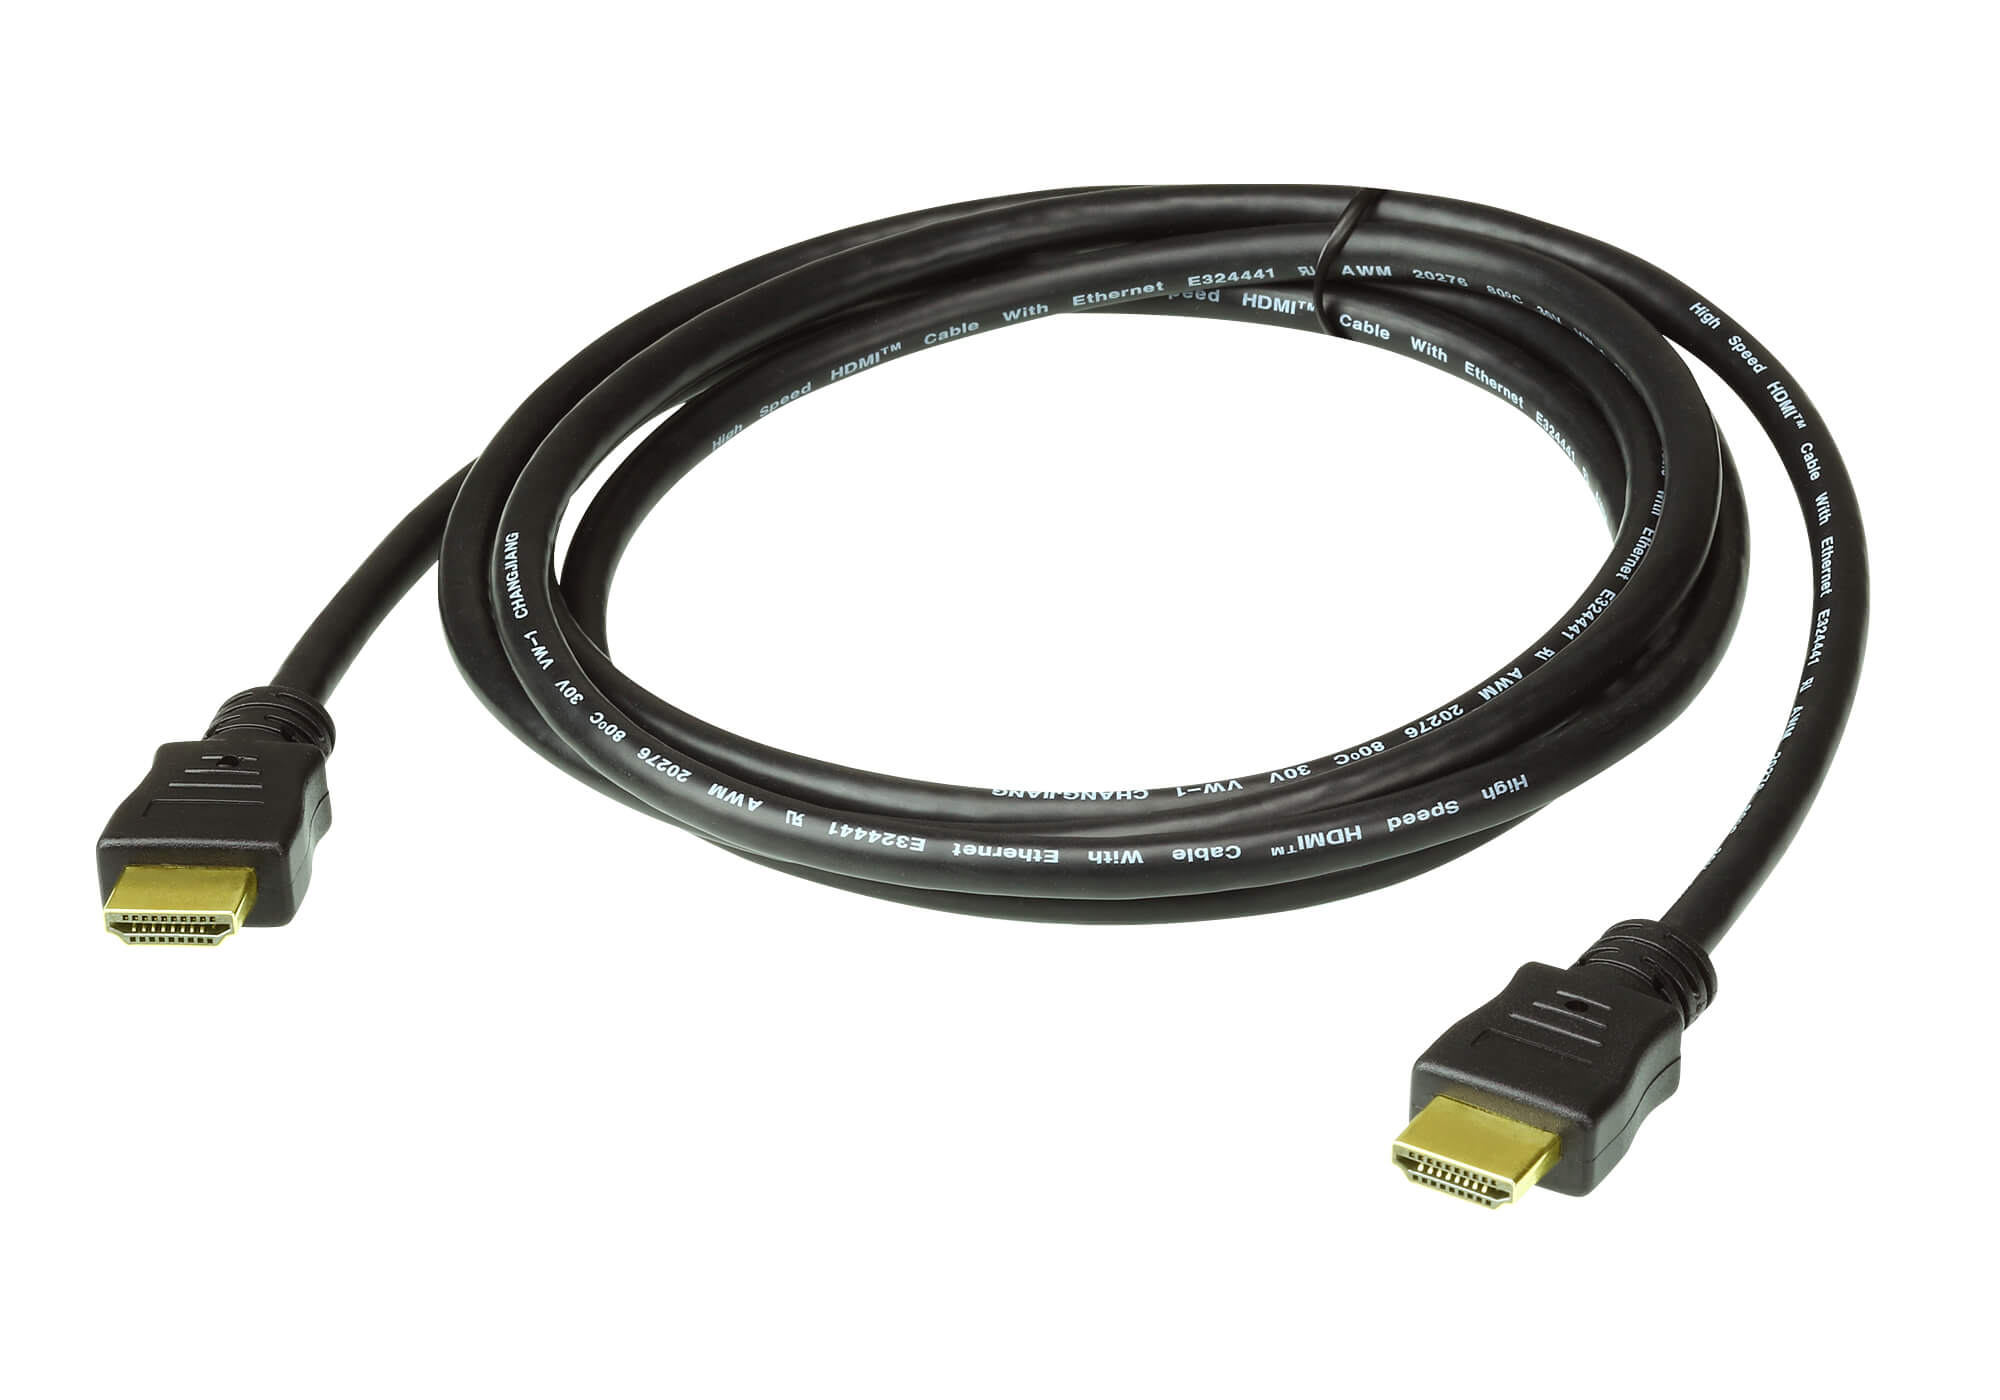 Aten Premium 5m High Speed HDMI Cable with Ethernet, supports up to 4096 x 2160 @ 60Hz, High quality tinned copper wire gold plated connectors